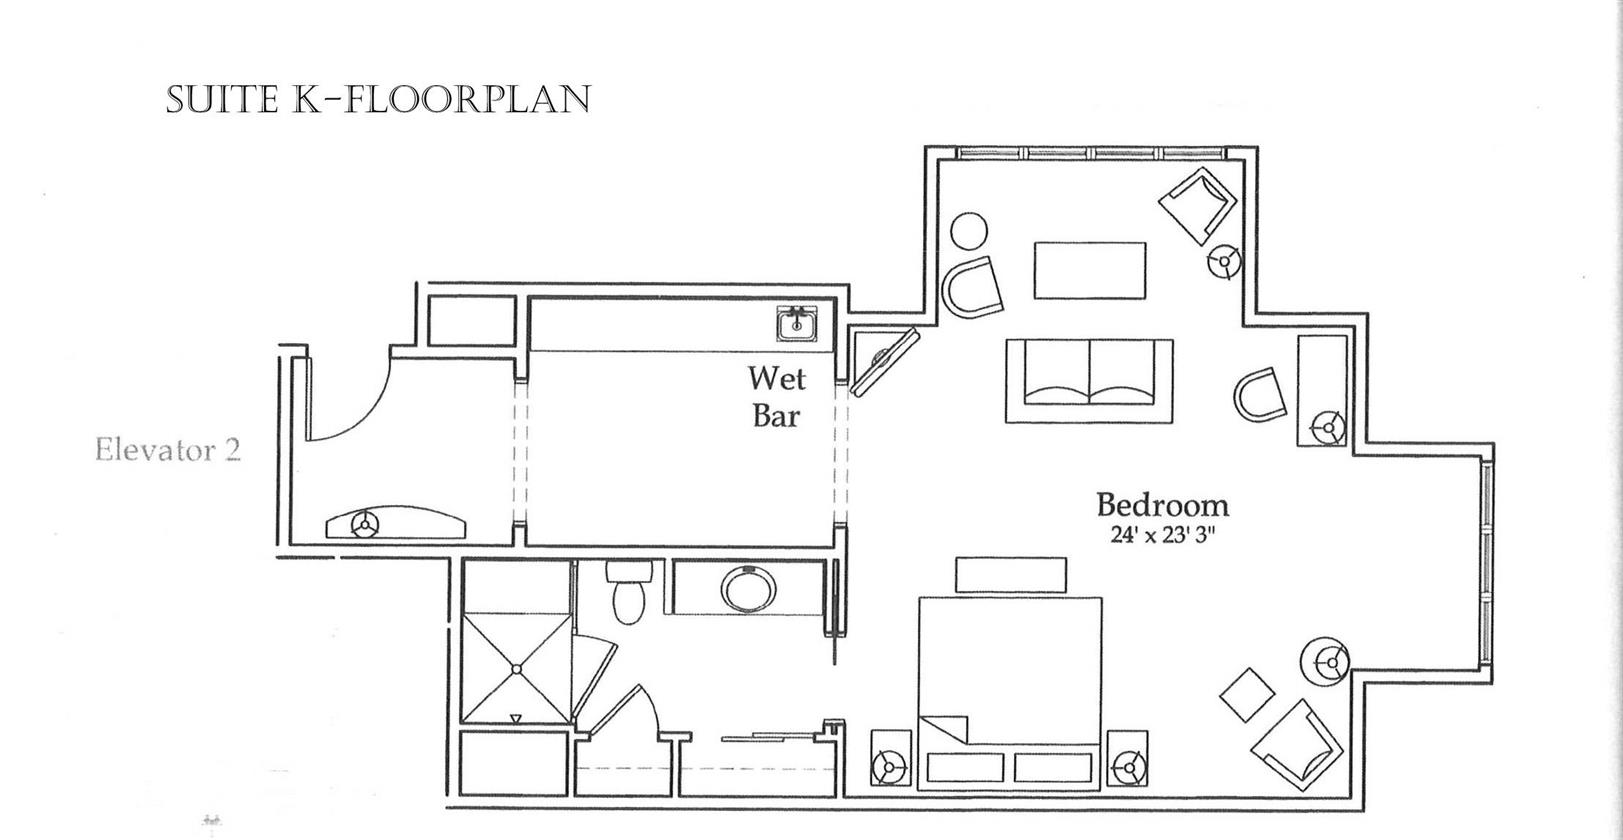 Floor Plan for Clubhouse Suite K